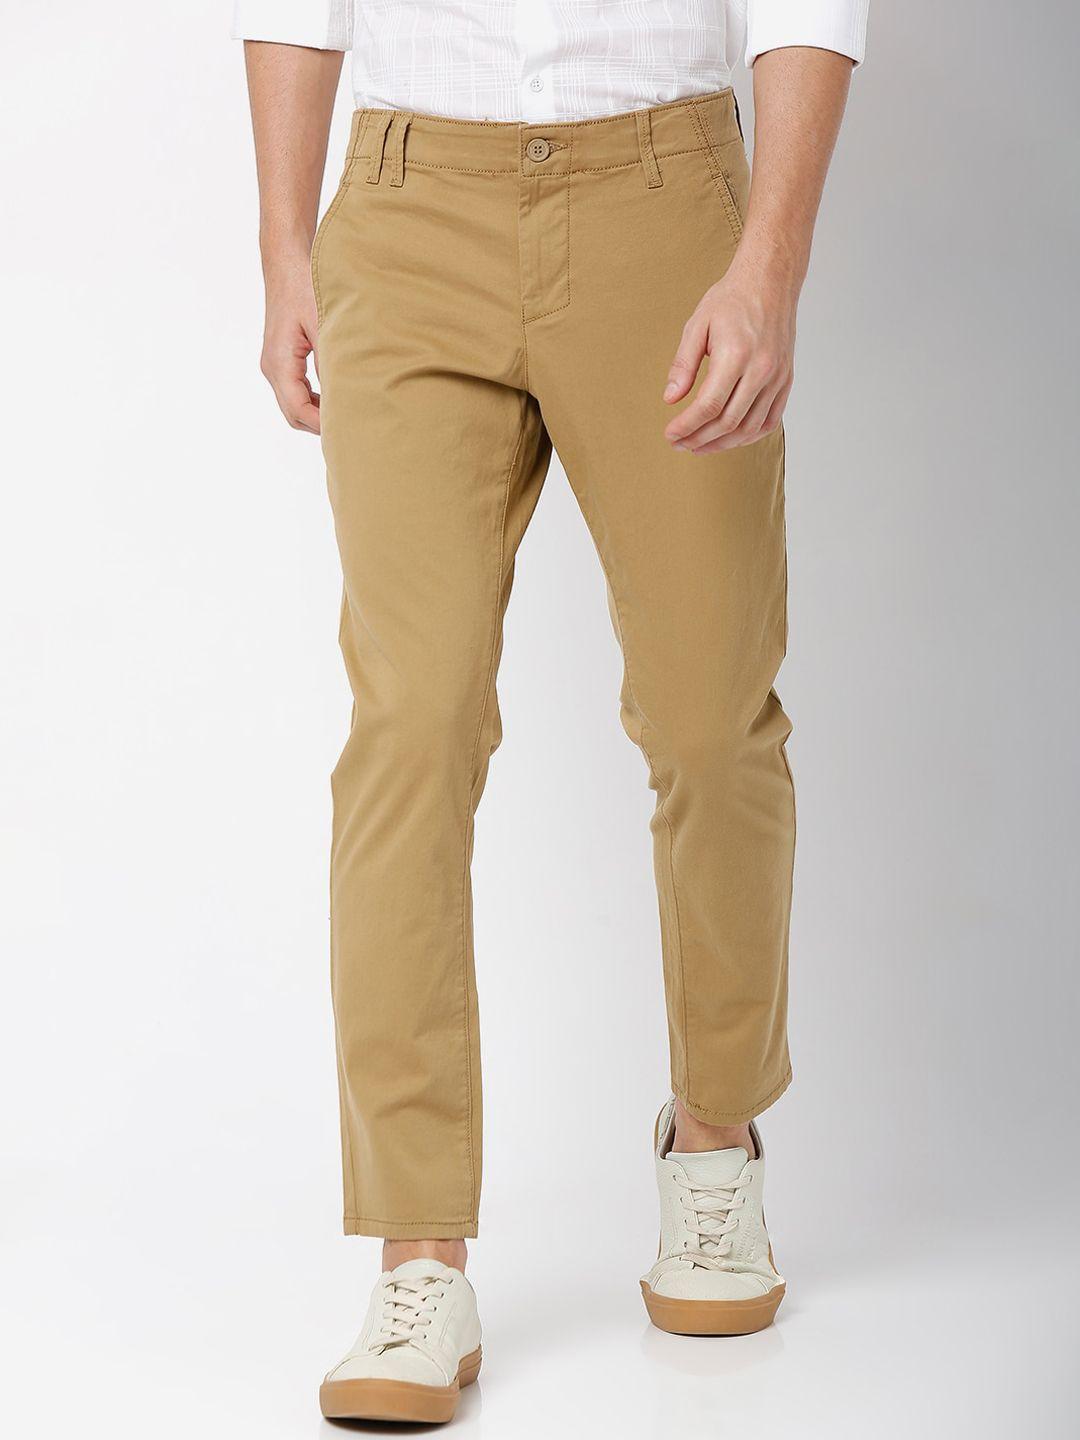 mufti-men-slim-fit-mid-rise-chinos-trousers